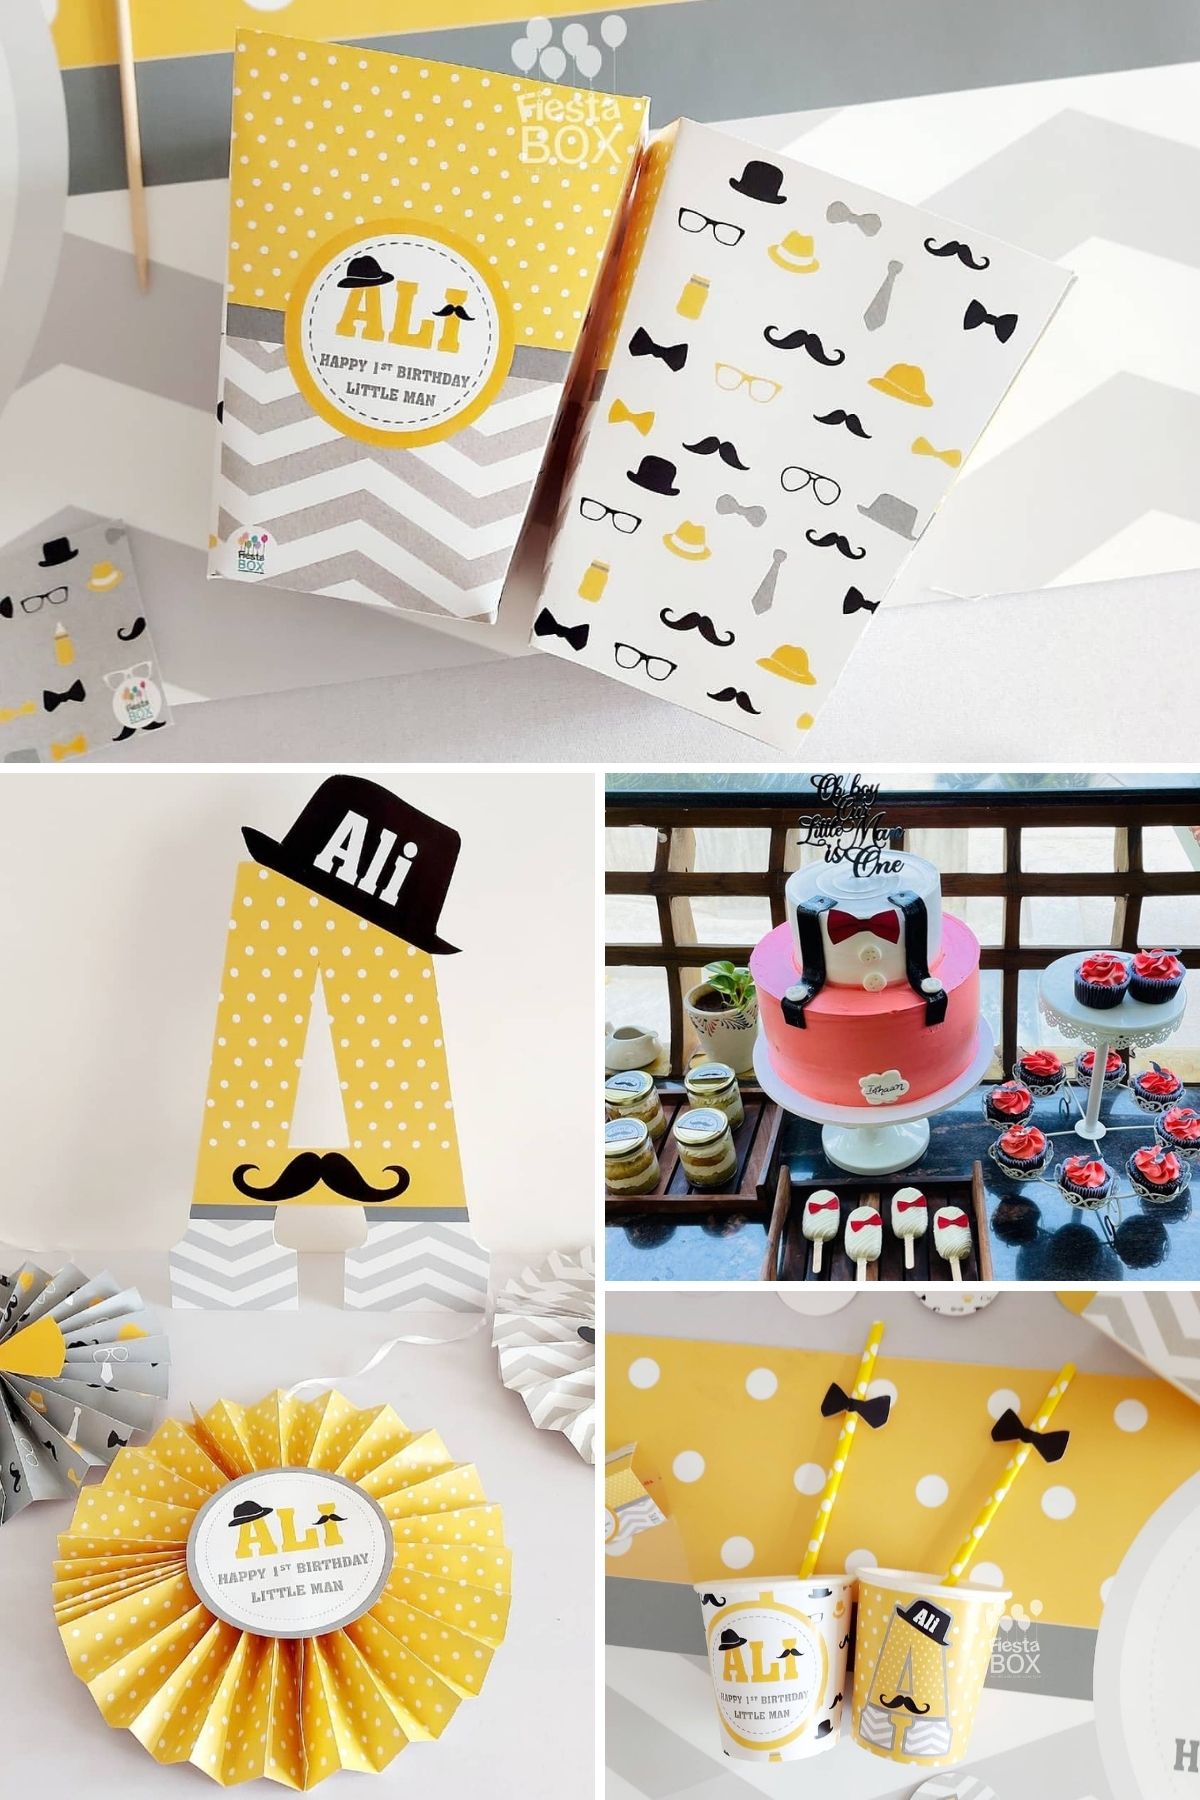 Photo collage for little man party theme including party favors, decorations, and a cake.